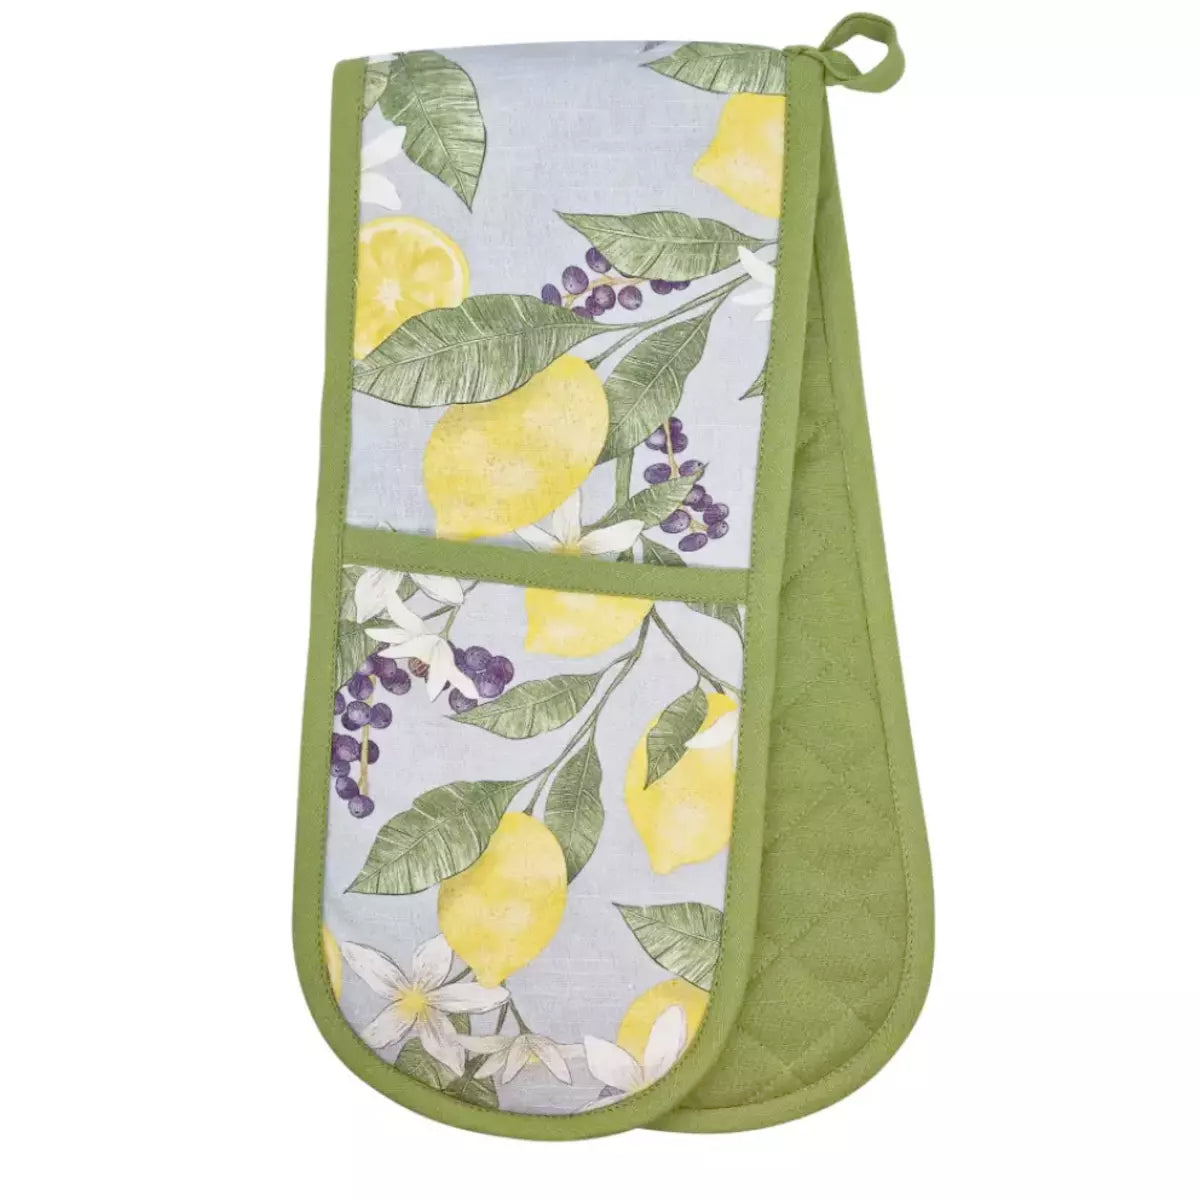 A Lemon Oven Double Glove made of cotton fabric by j.elliot.